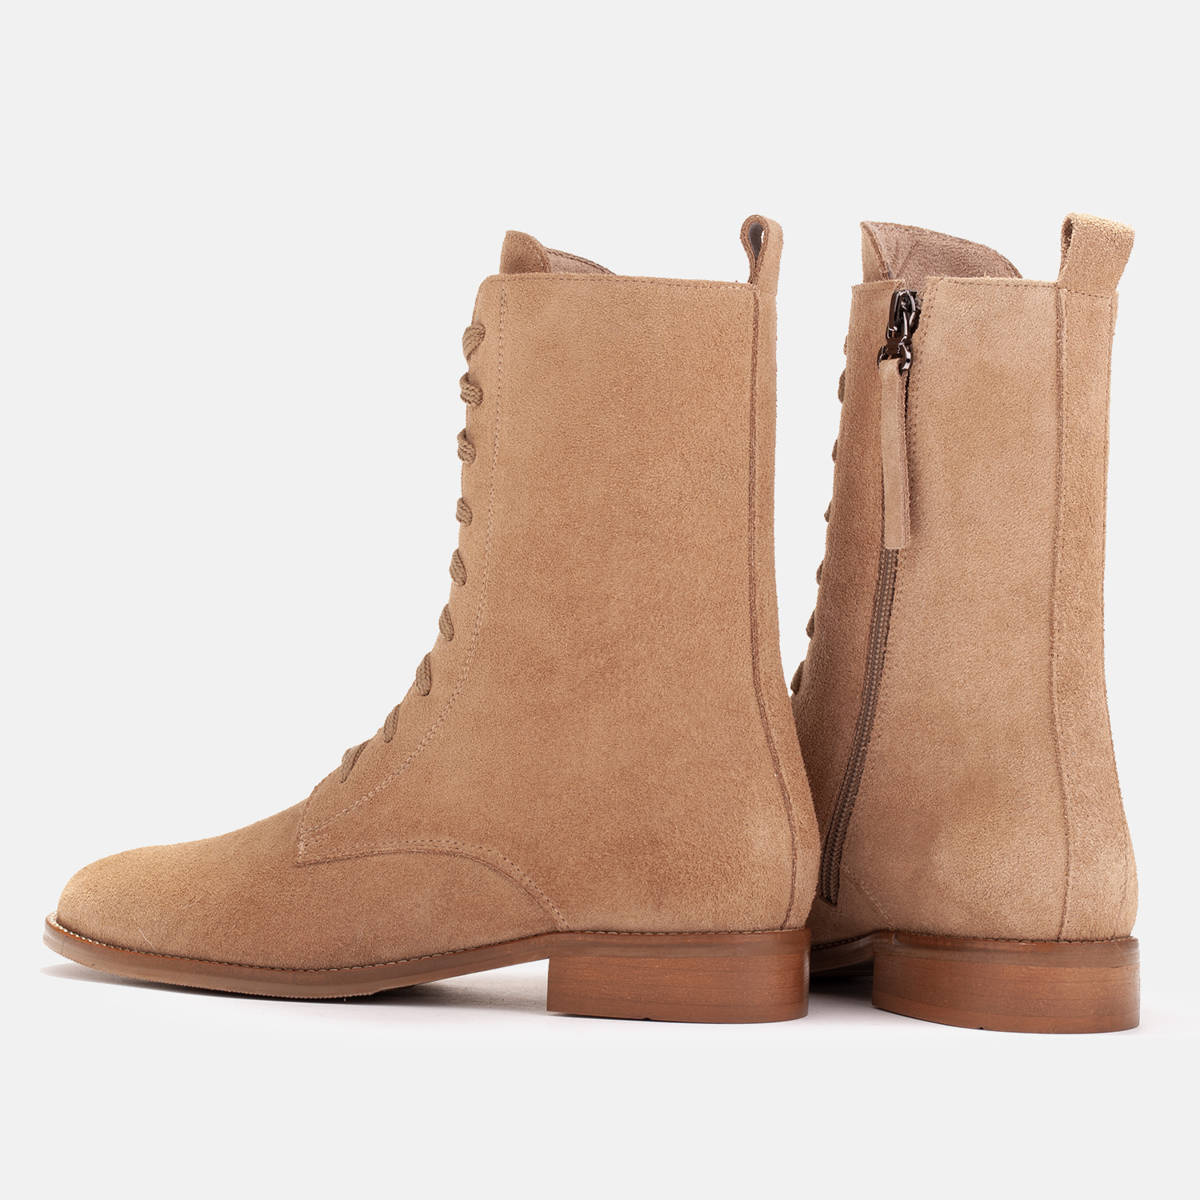 Classic low-heeled boots